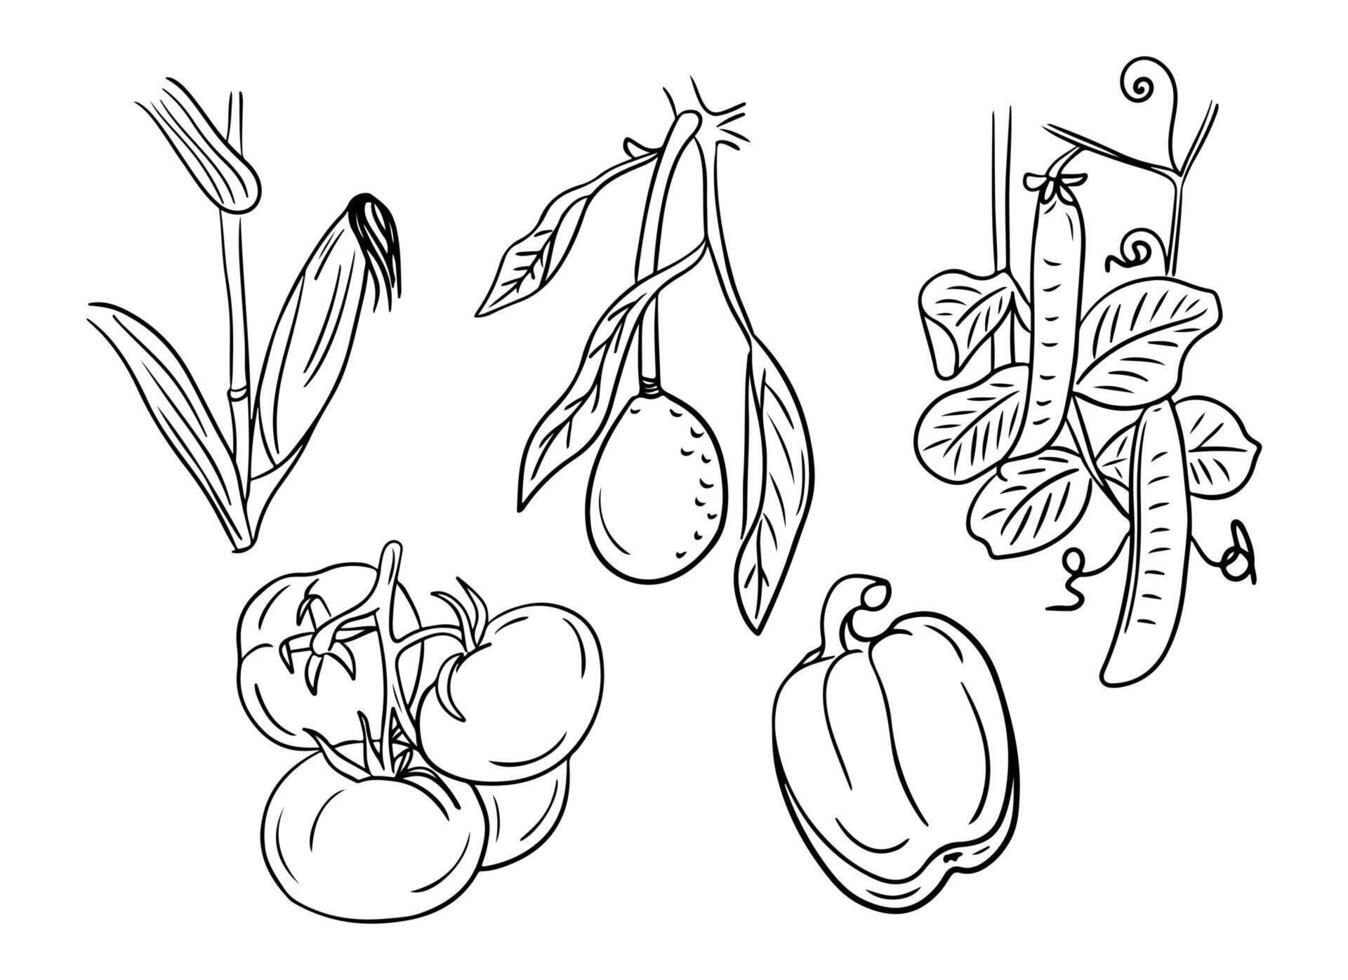 Ink hand drawn illustration of growing vegetables. Sketchy outline vegetables for healthy eating on white background. Ideal for coloring pages, tattoo, pattern vector